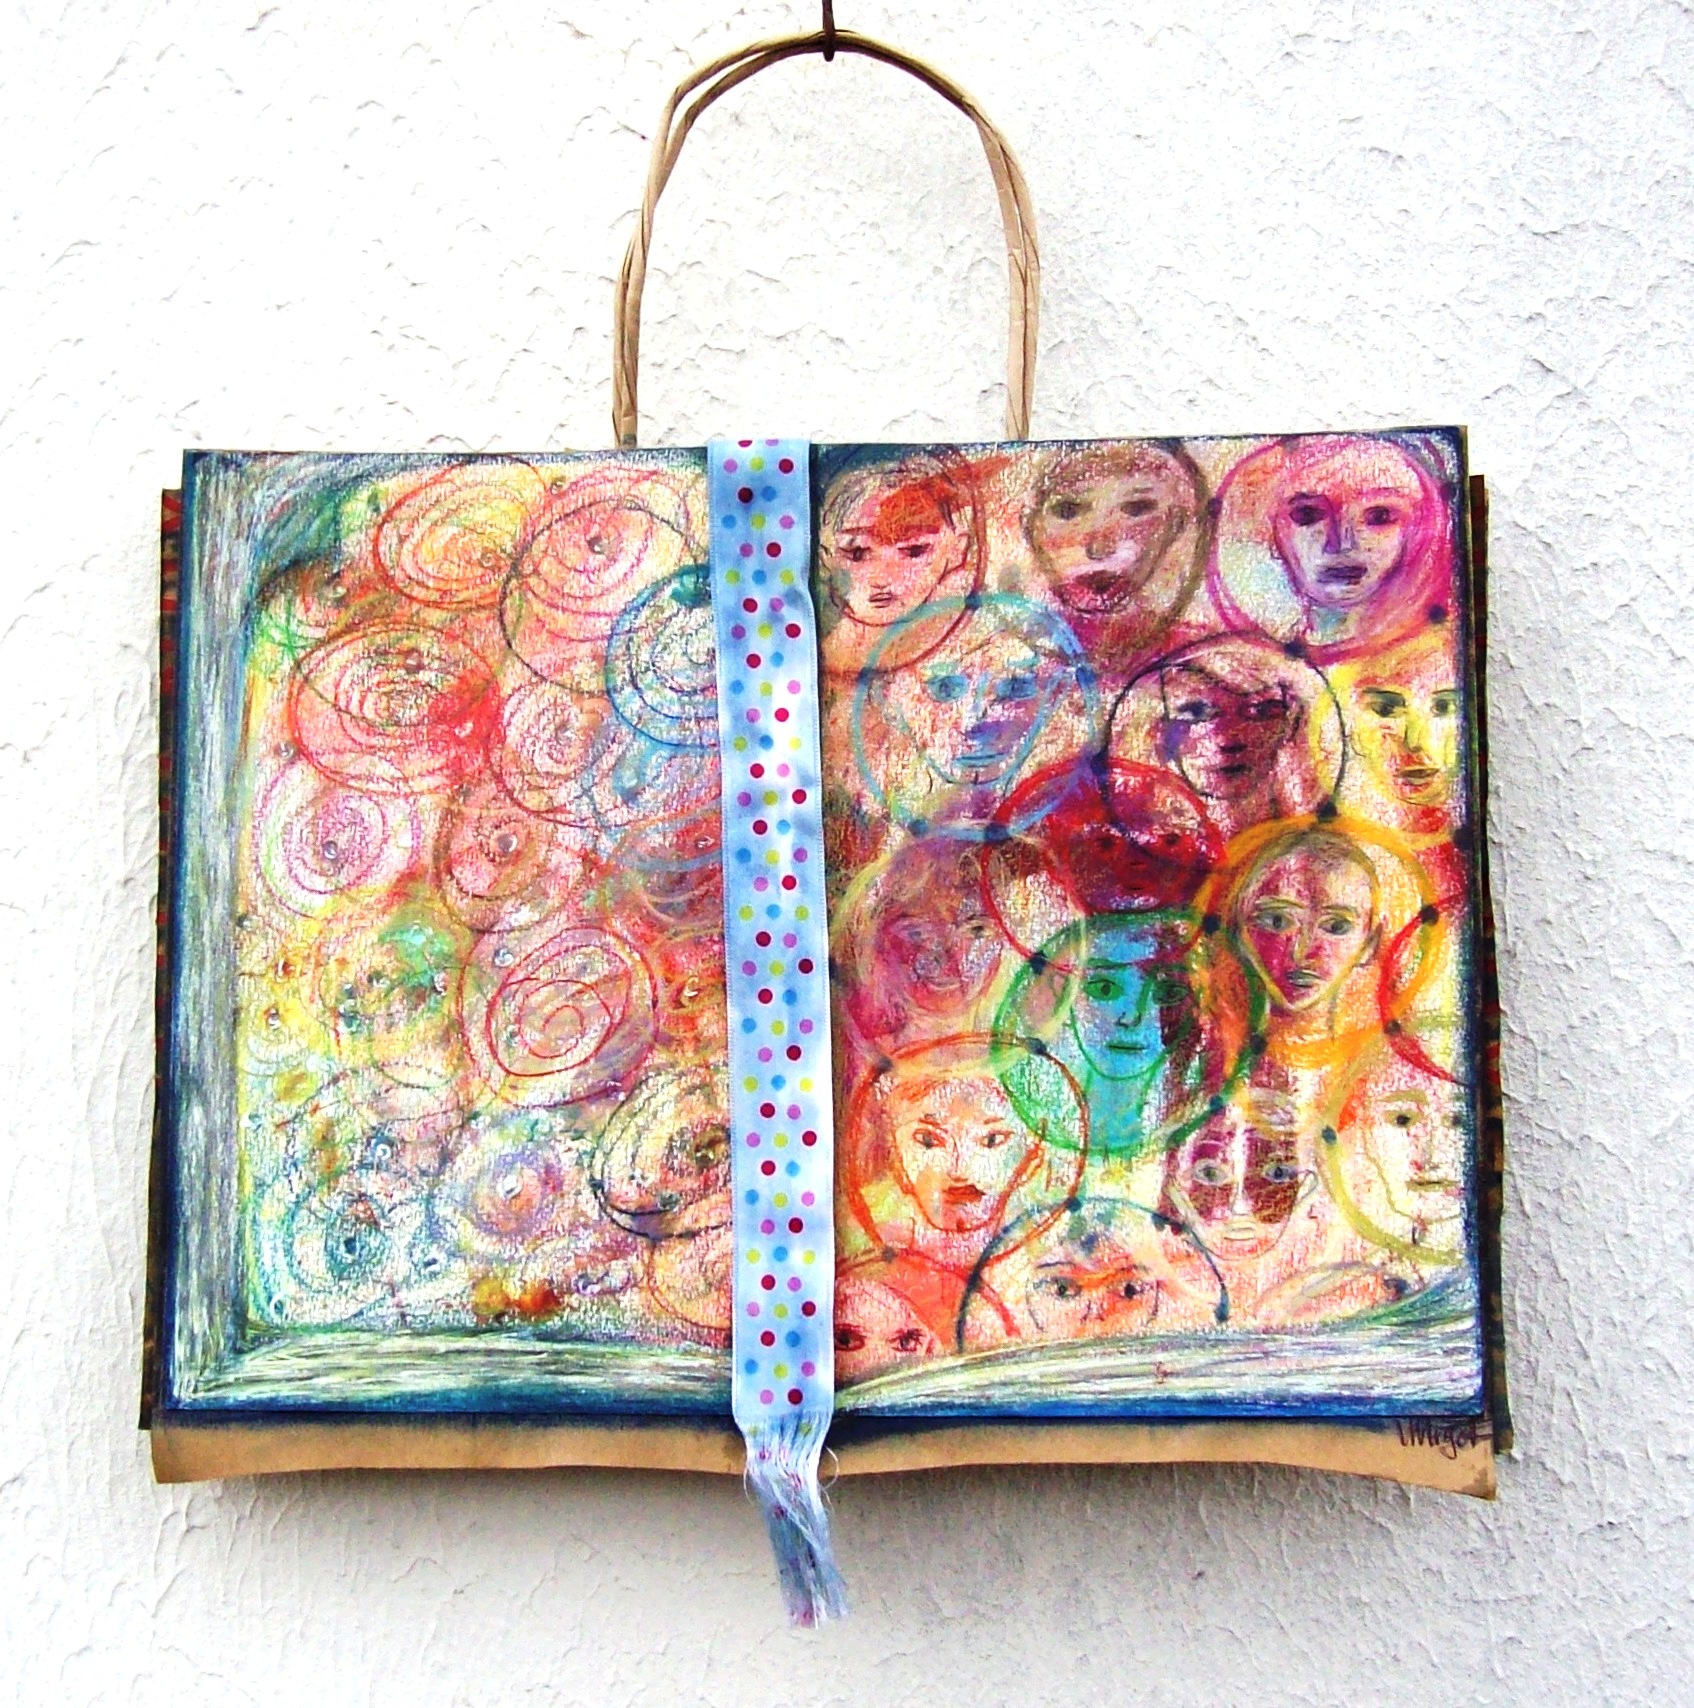 kids-in-the-box-la-fin-nest-pas-ecrite-the-end-is-not-written-work-on-upcycled-paper-bag-33-x-26-cm-mixed-media